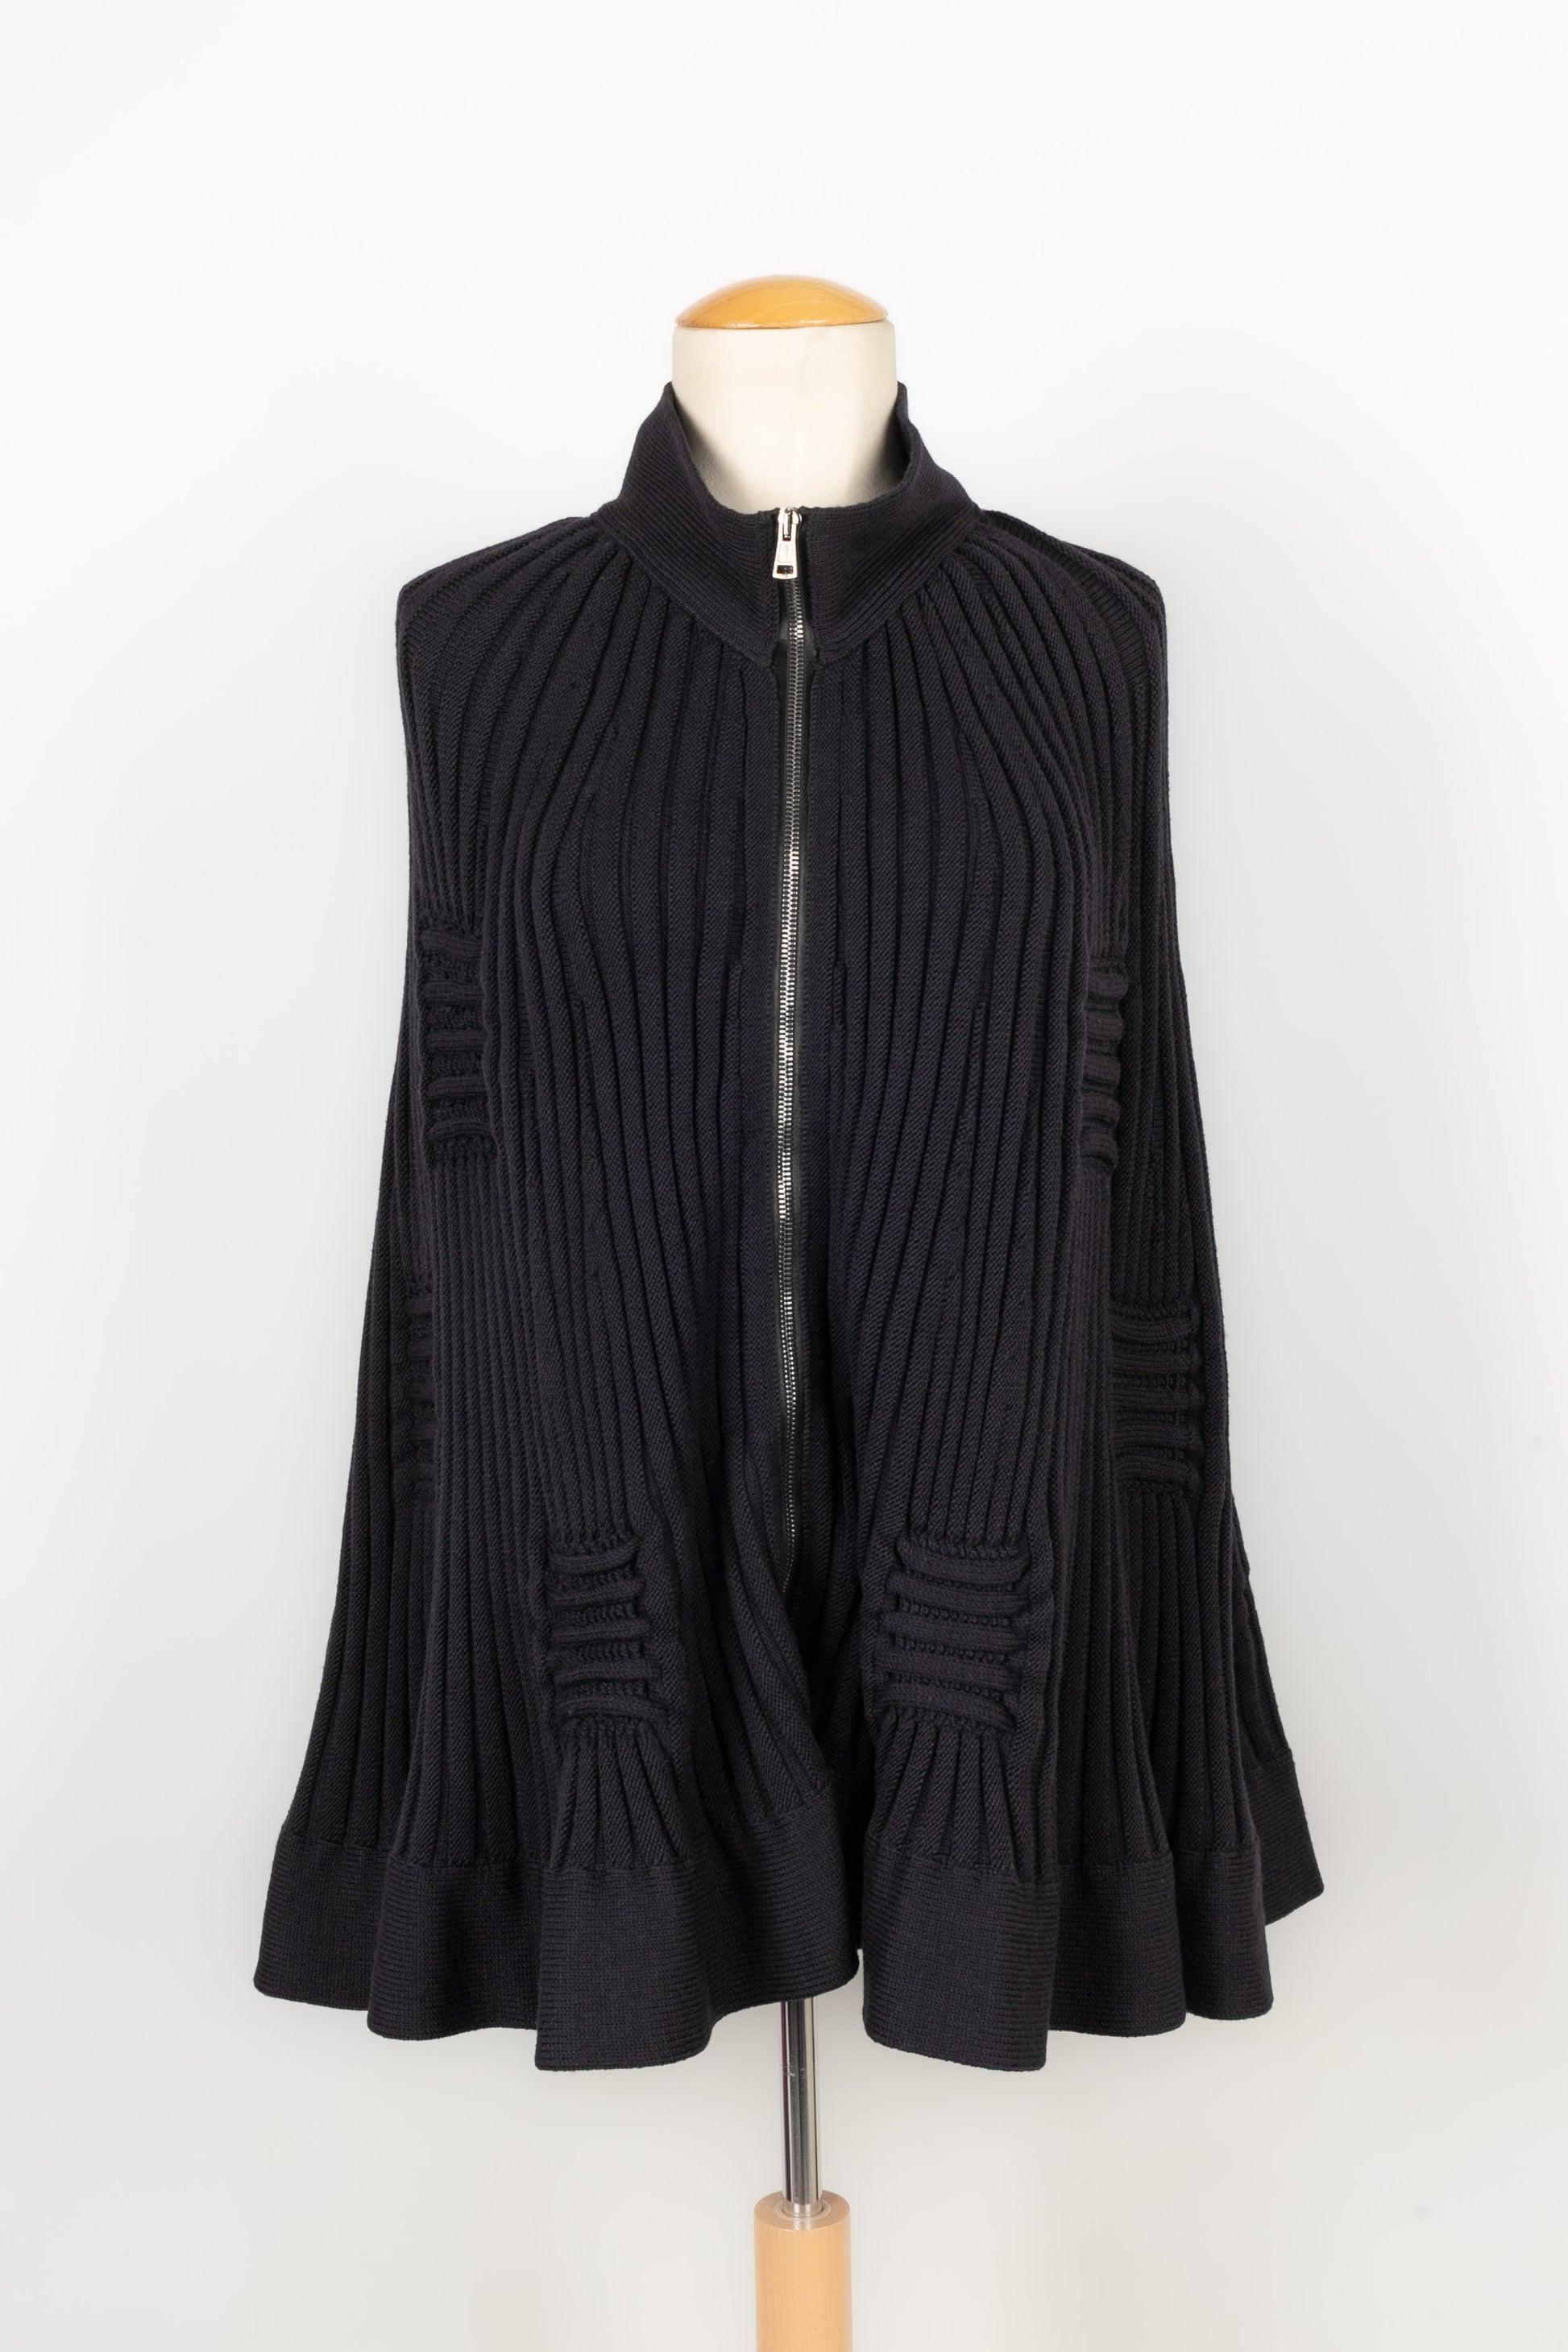 Valentino Wool Cape with Black Leather Ascot Tie In Excellent Condition For Sale In SAINT-OUEN-SUR-SEINE, FR